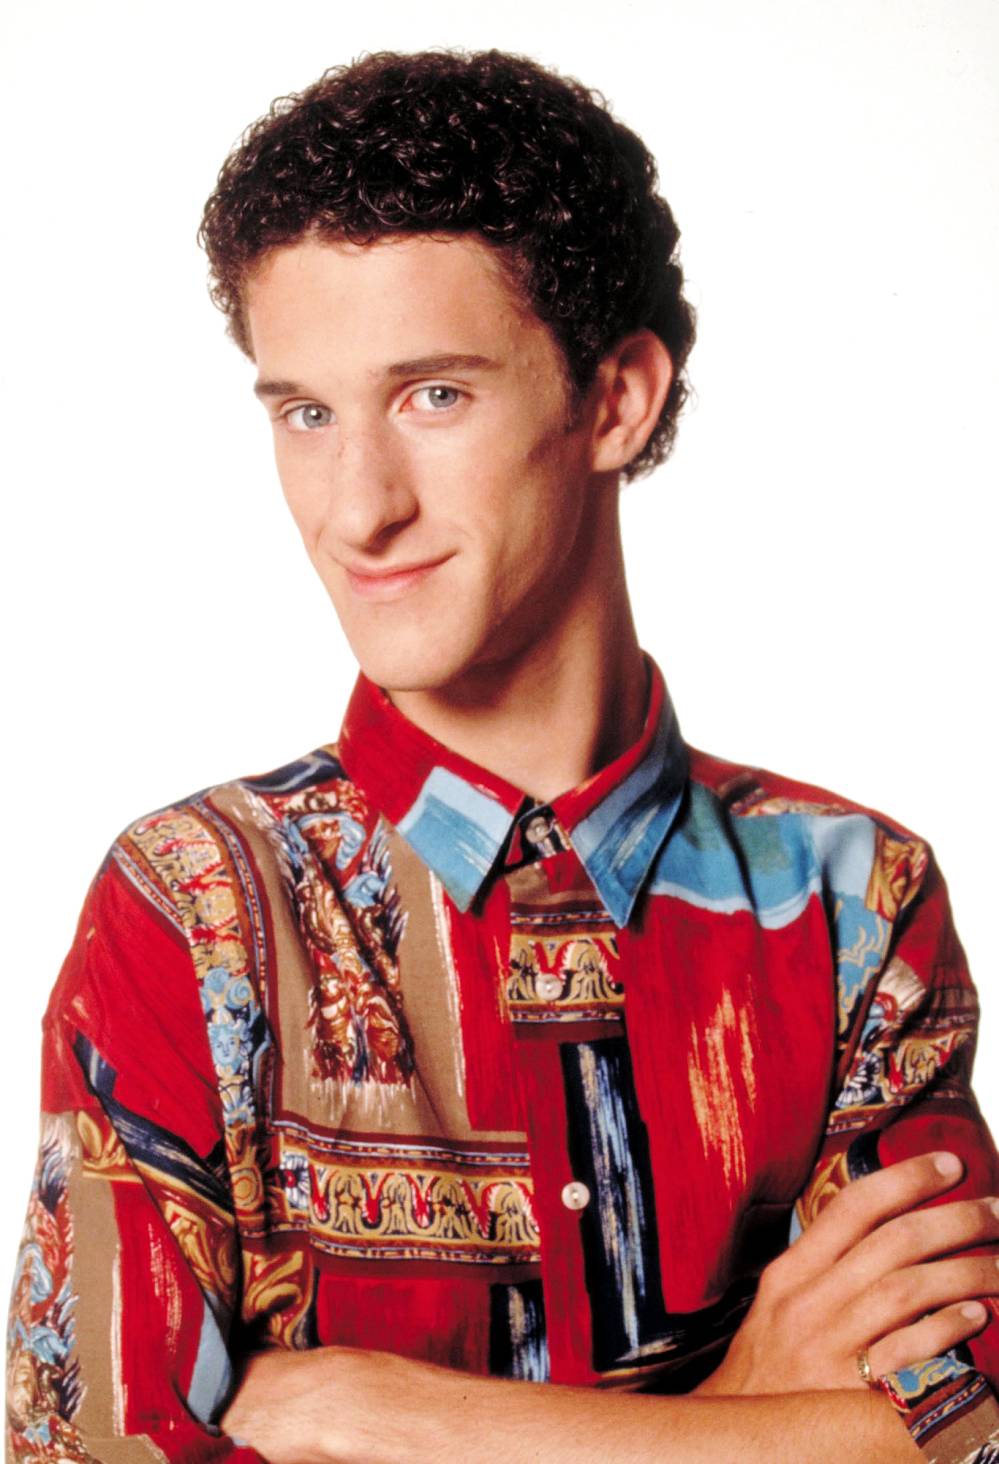 Saved By Bell Dustin Diamond Reportedly Hospitalized Over Cancer